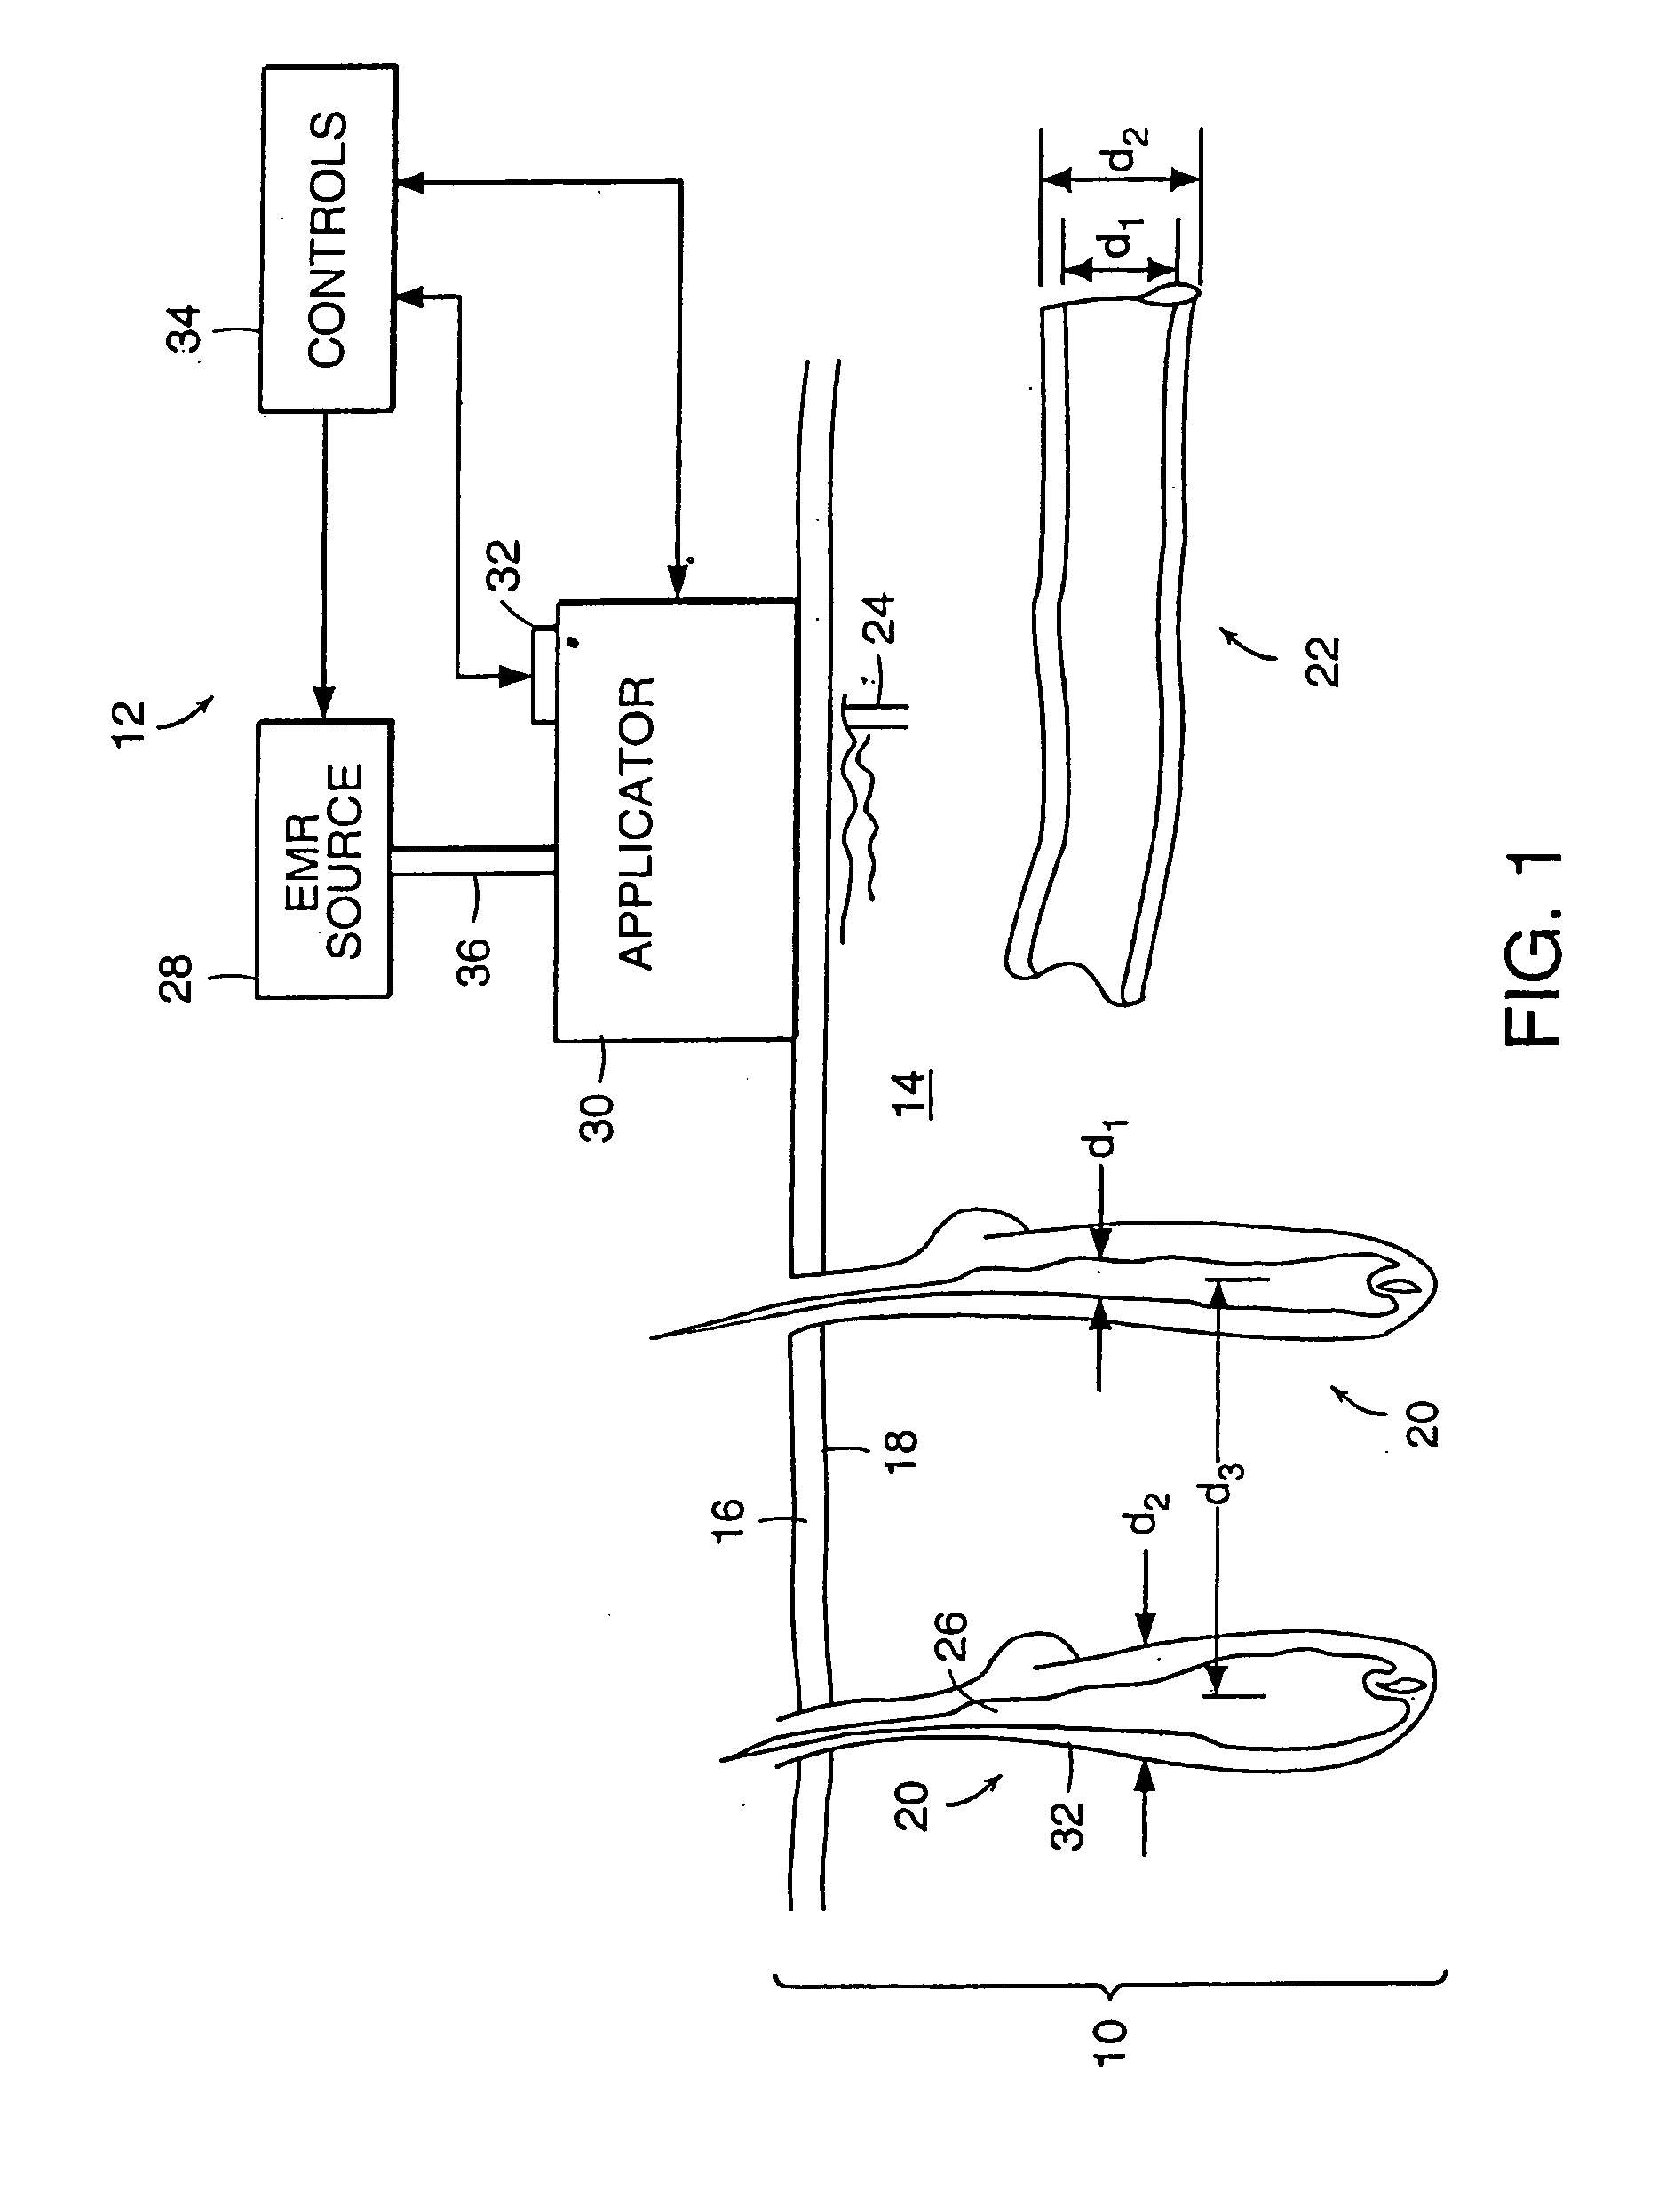 Method and Apparatus for Medical Treatment Utilizing Long Duration Electromagnetic Radiation